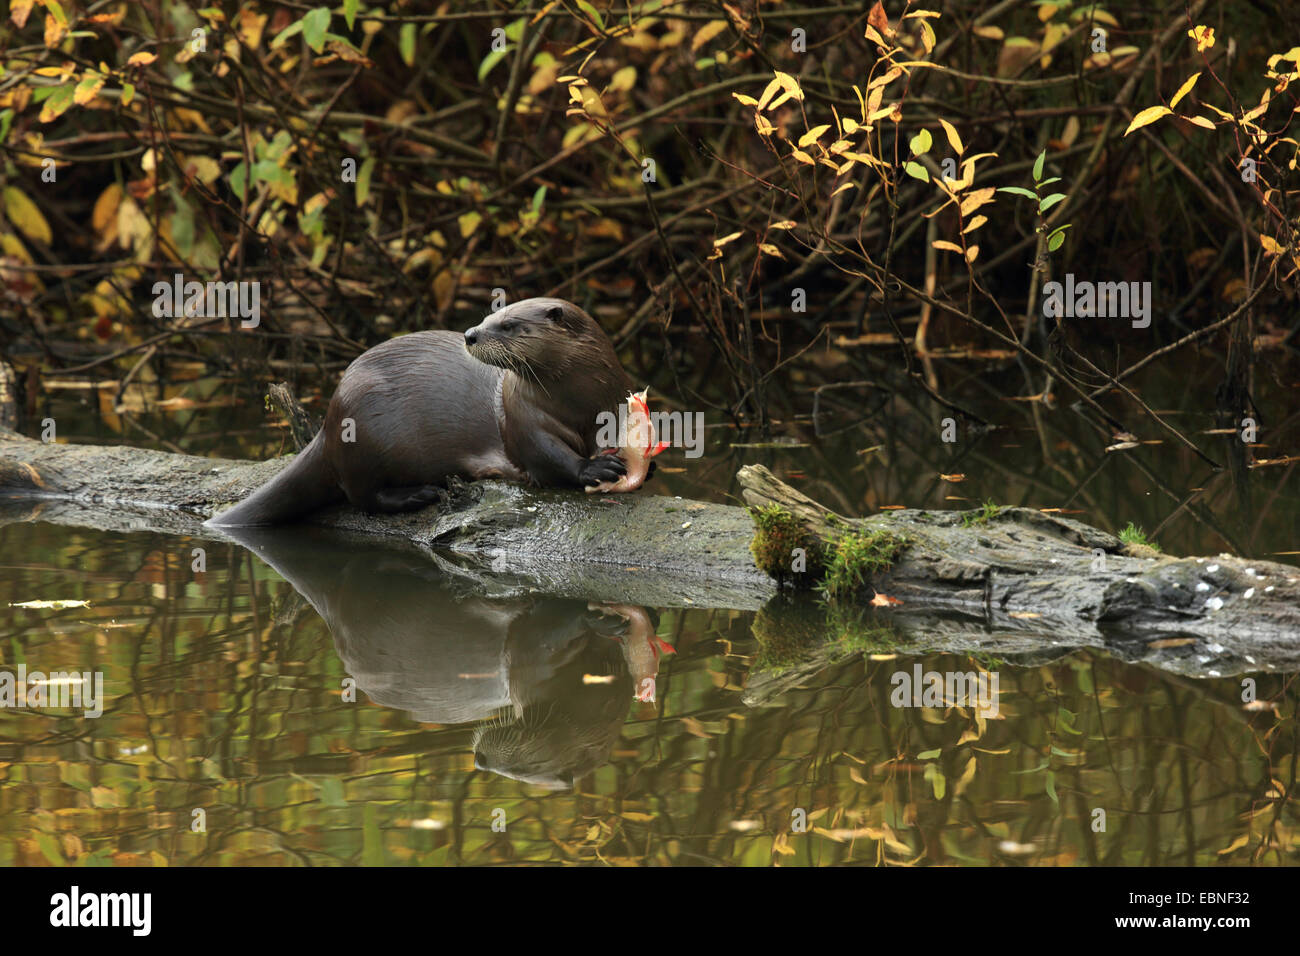 European river otter, European Otter, Eurasian Otter (Lutra lutra), eating fish on a tree trunk in a pond, Germany, Saxony Stock Photo